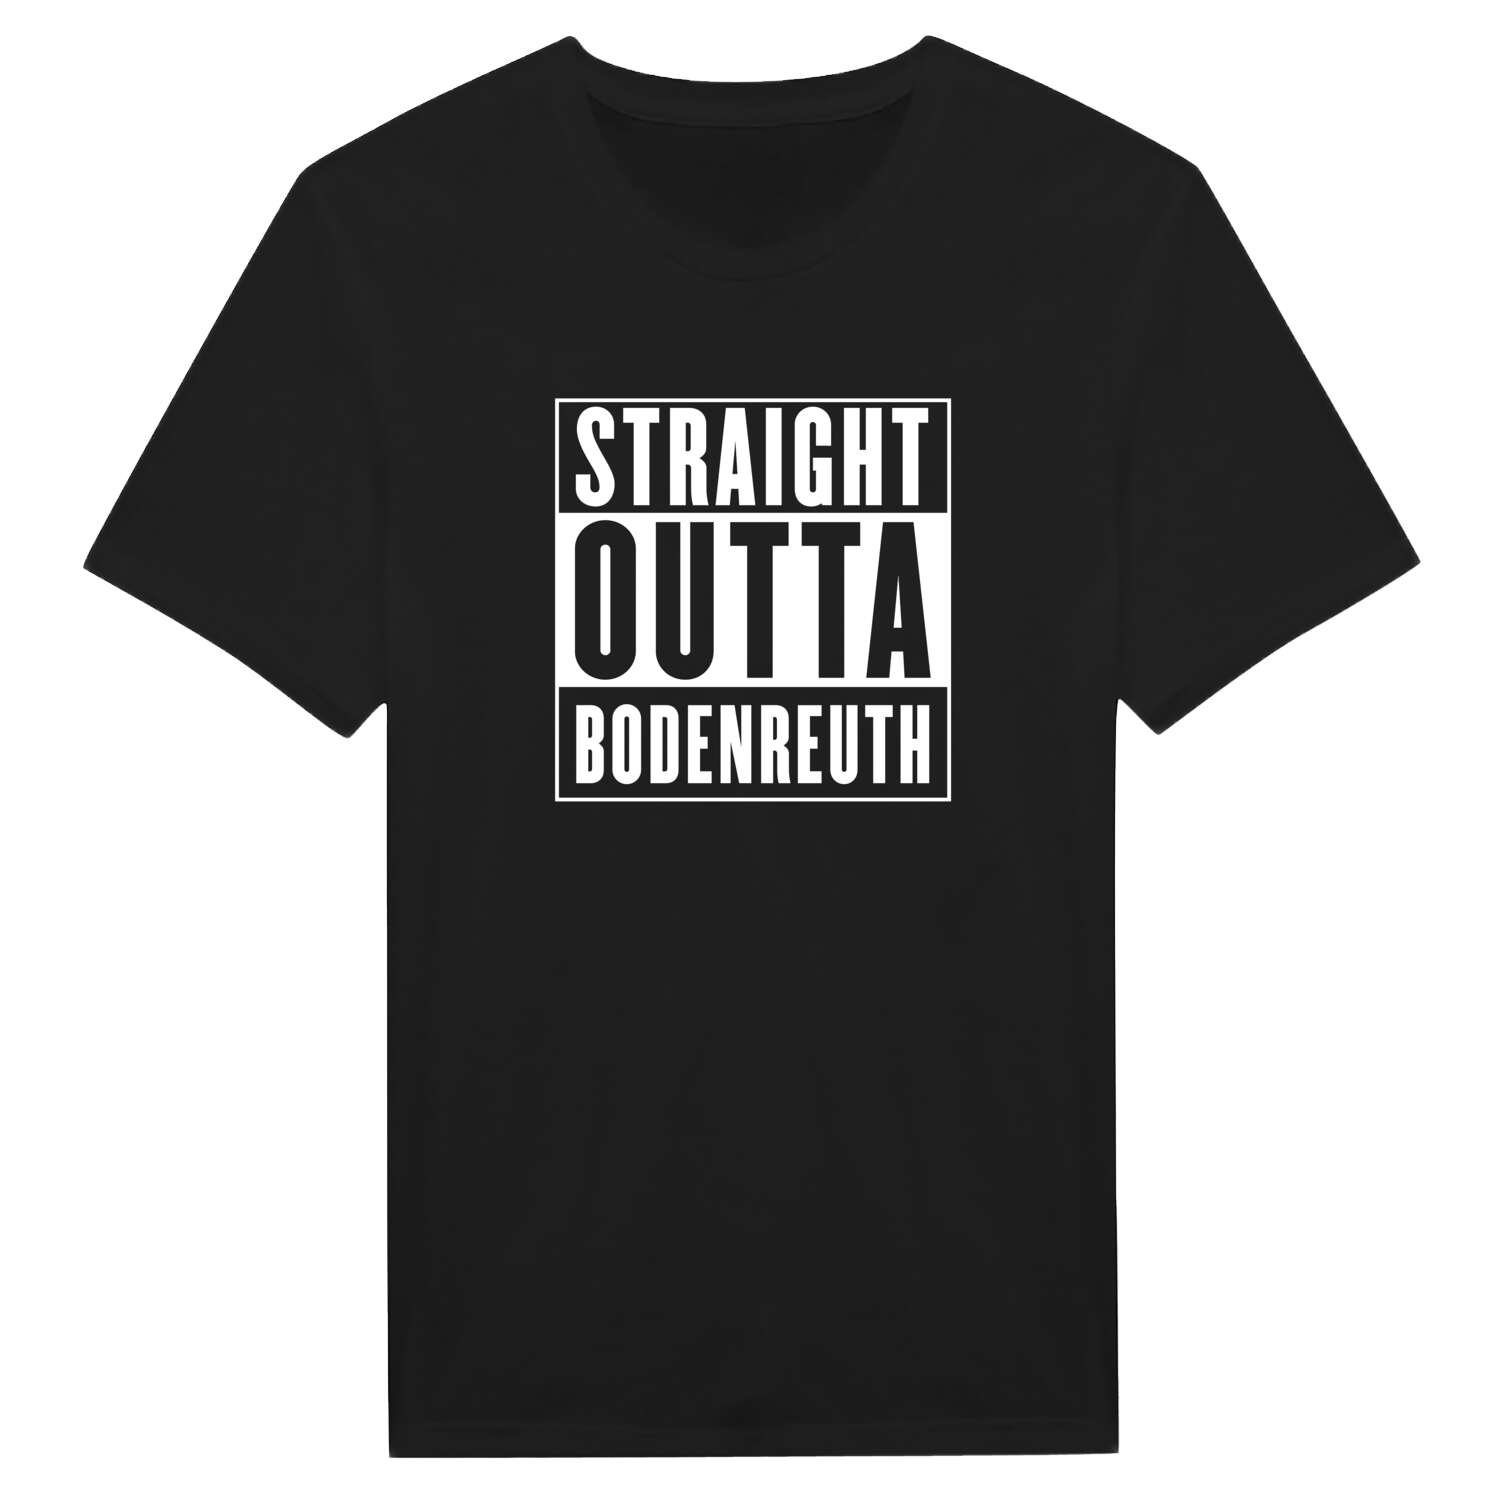 Bodenreuth T-Shirt »Straight Outta«